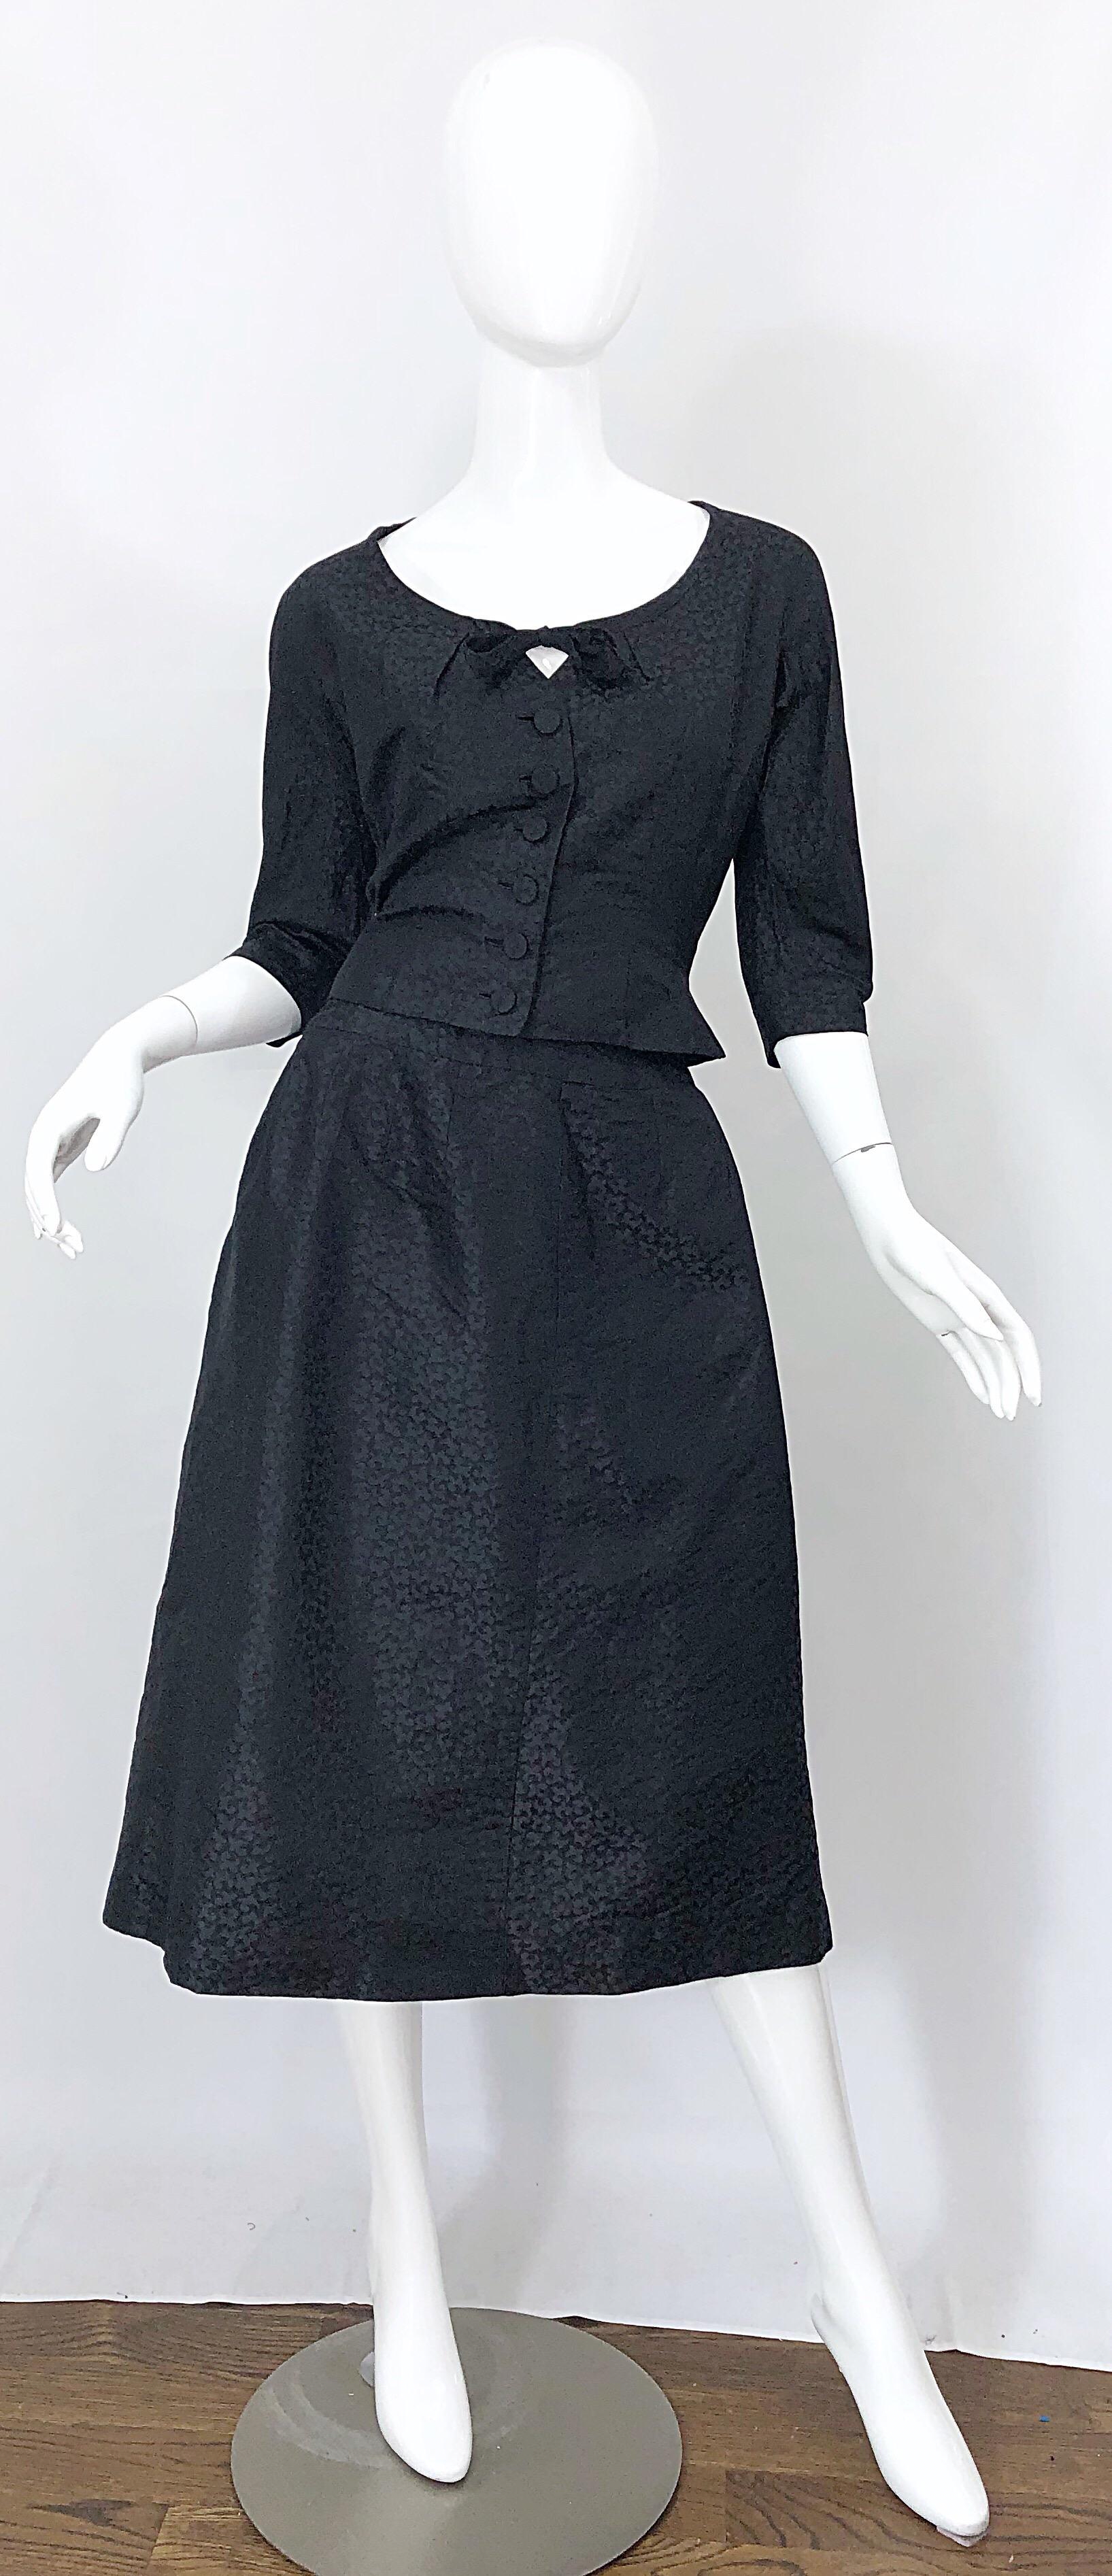 Chic 1950s ADELE SIMPSON black silk two piece blouse and skirt! Features a tailored 3/4 sleeves blouse with tie at center neck. Silk Covered buttons up the front center. High waisted A-Line skirt with metal zipper up the side with hook-and-eye